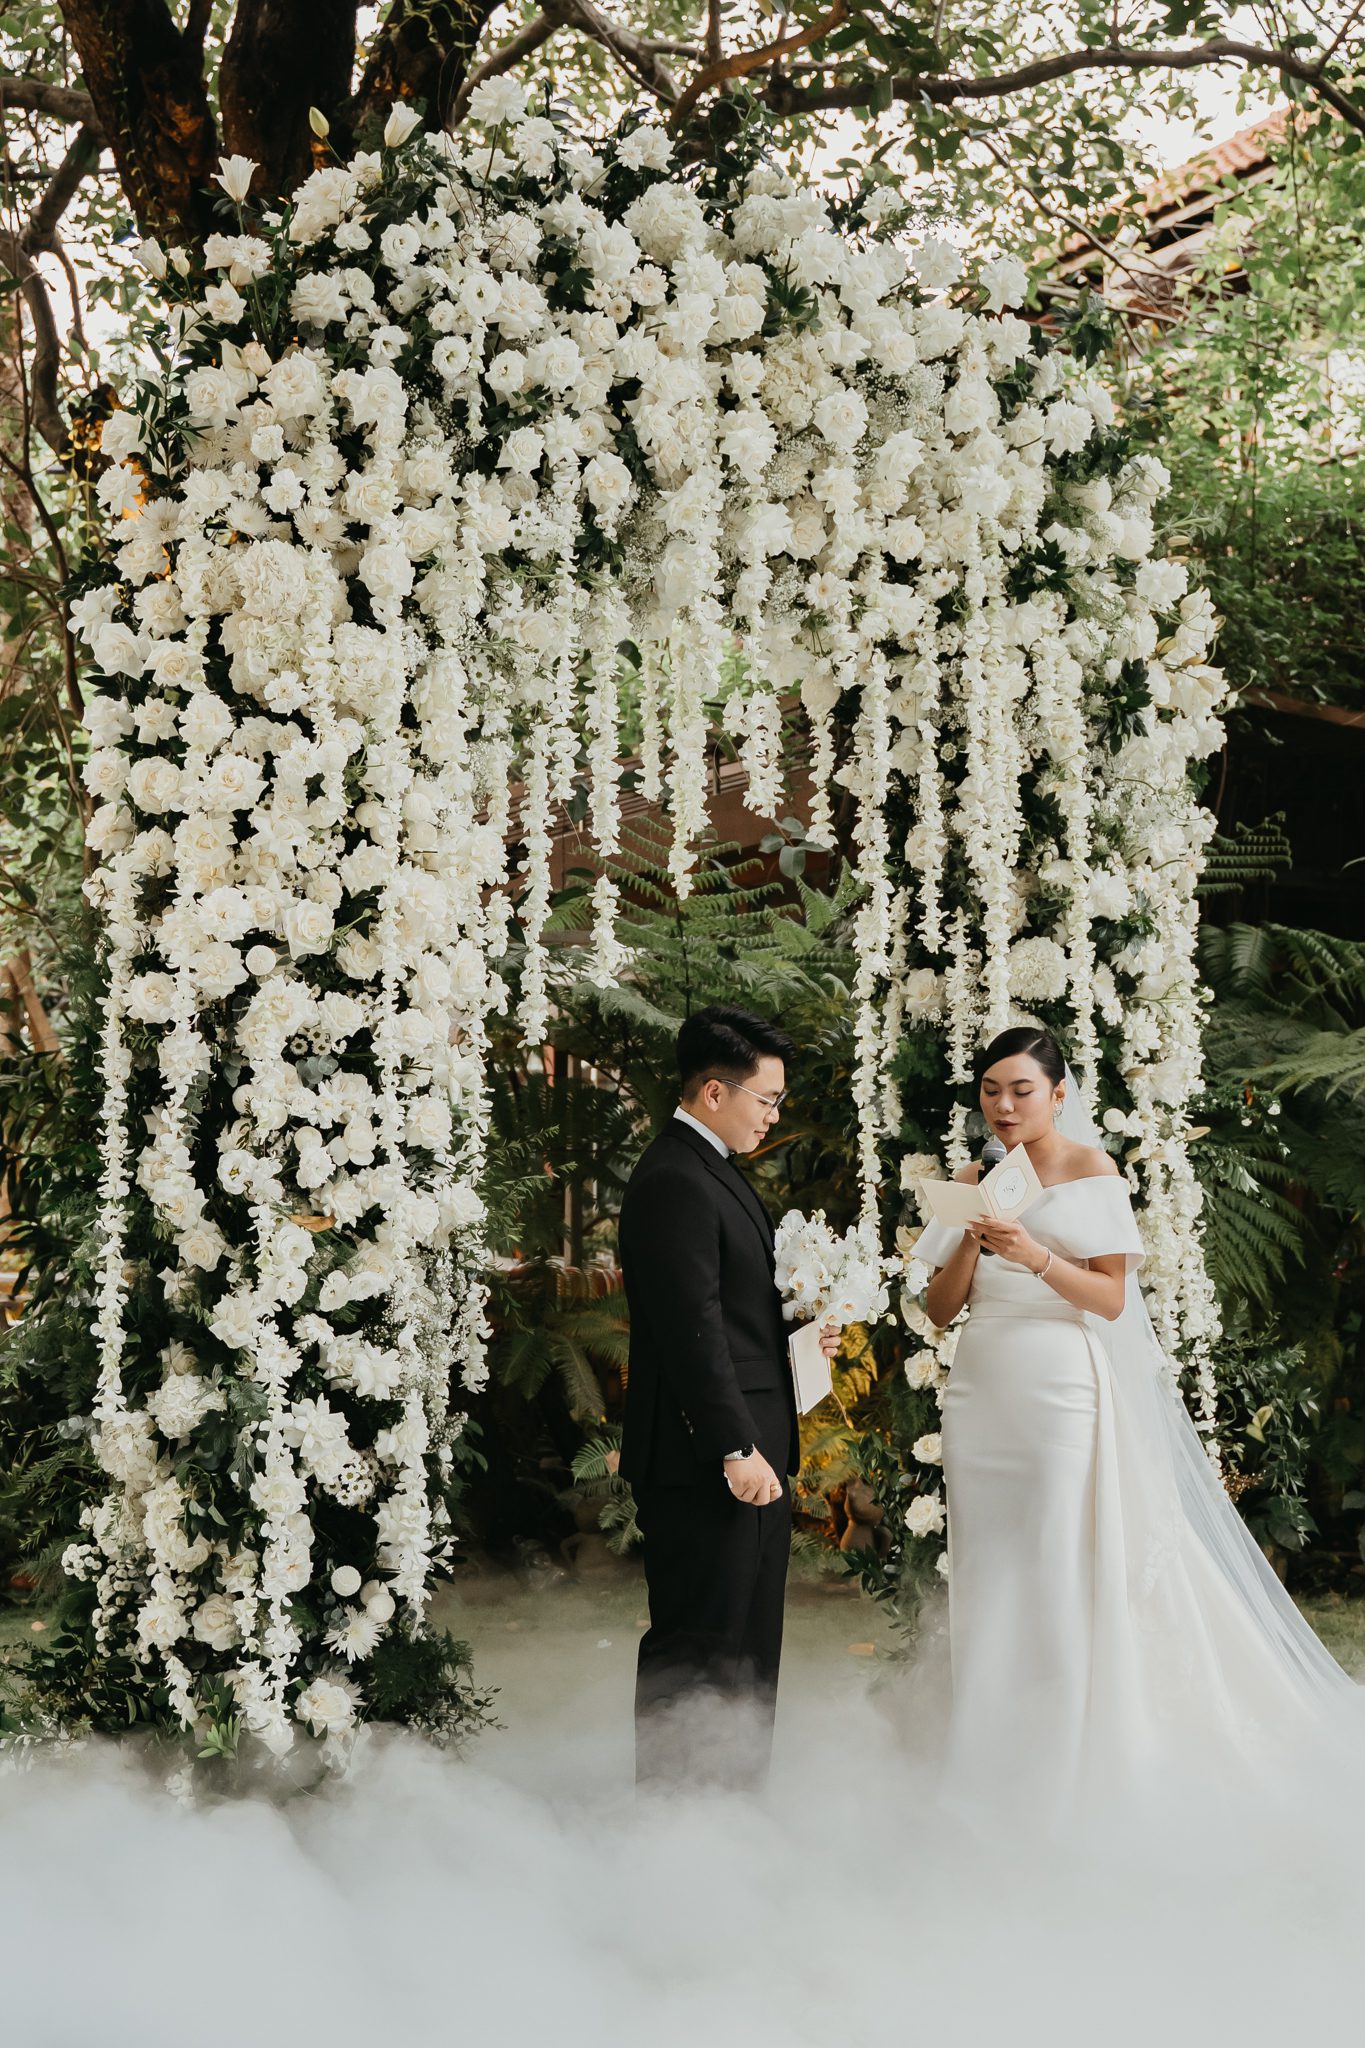 Saigon intimate wedding at An Lam Retreat 03423 - The Planners